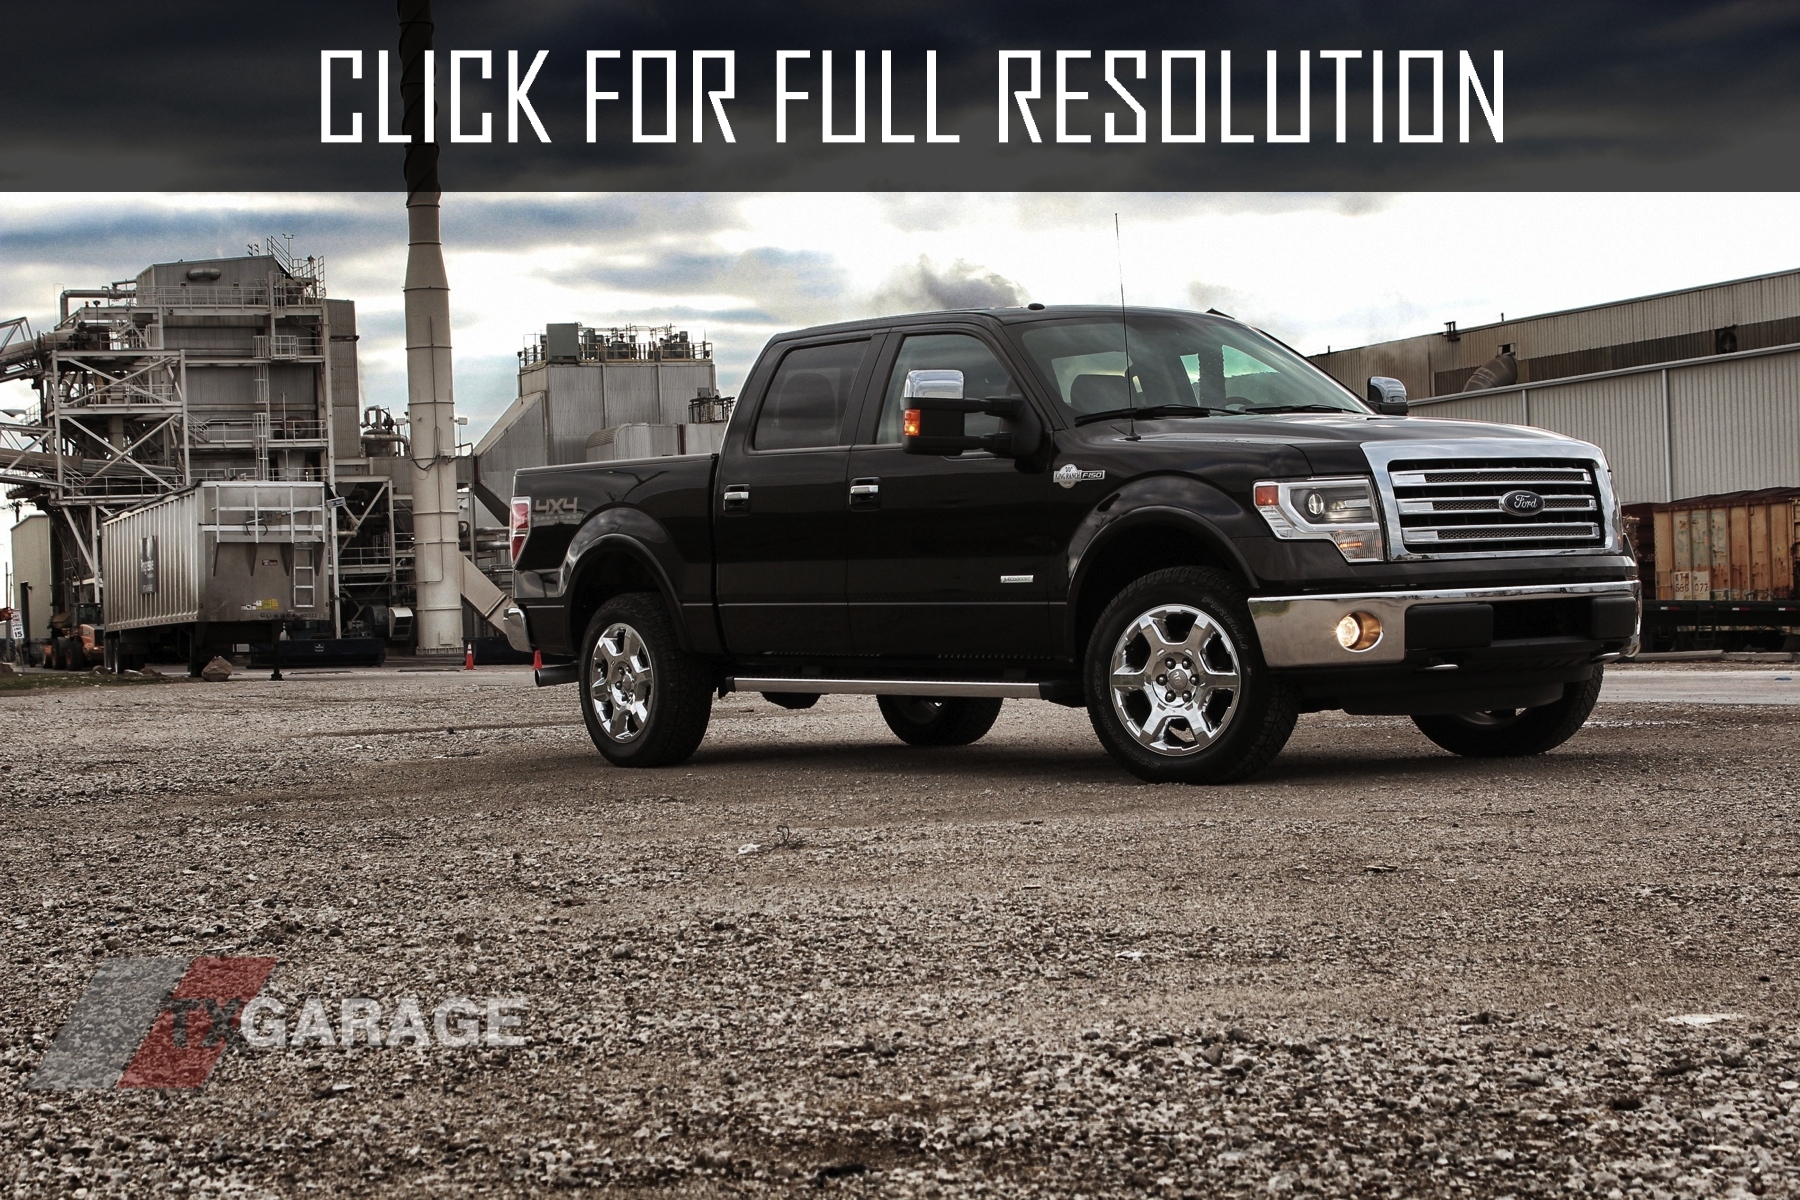 2013 Ford F150 King Ranch